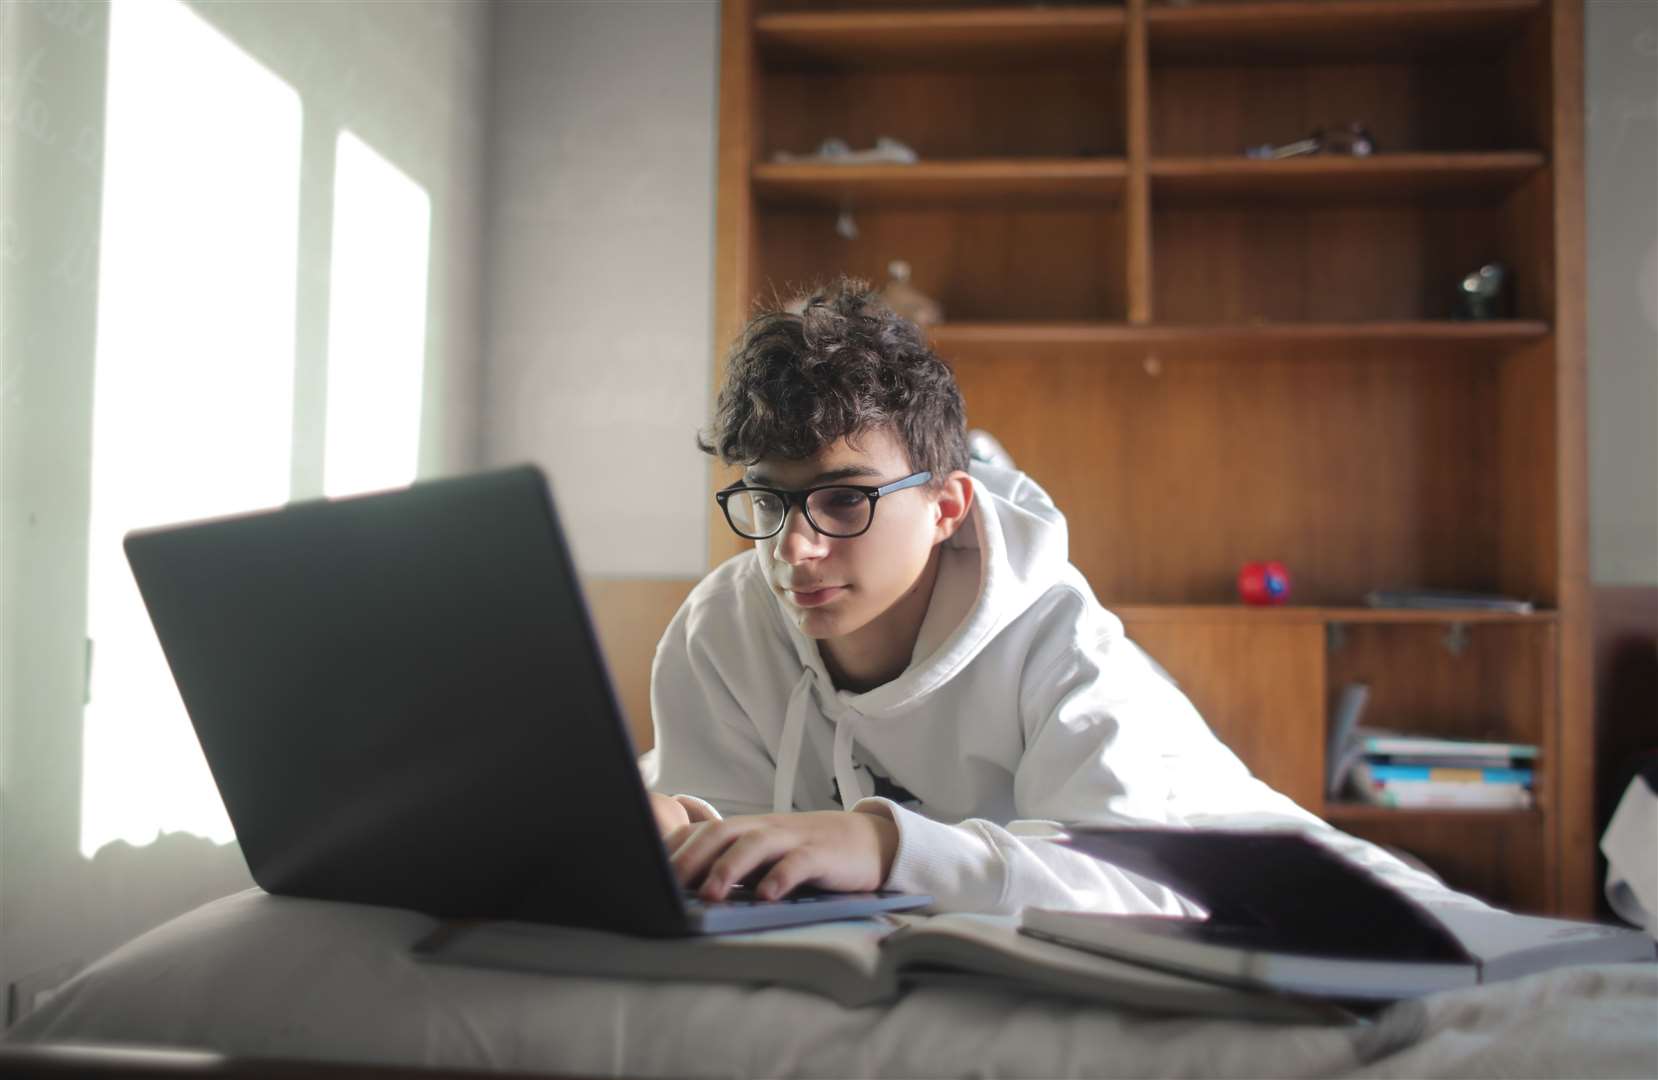 A young boy studies in his bedroom on books and laptop.